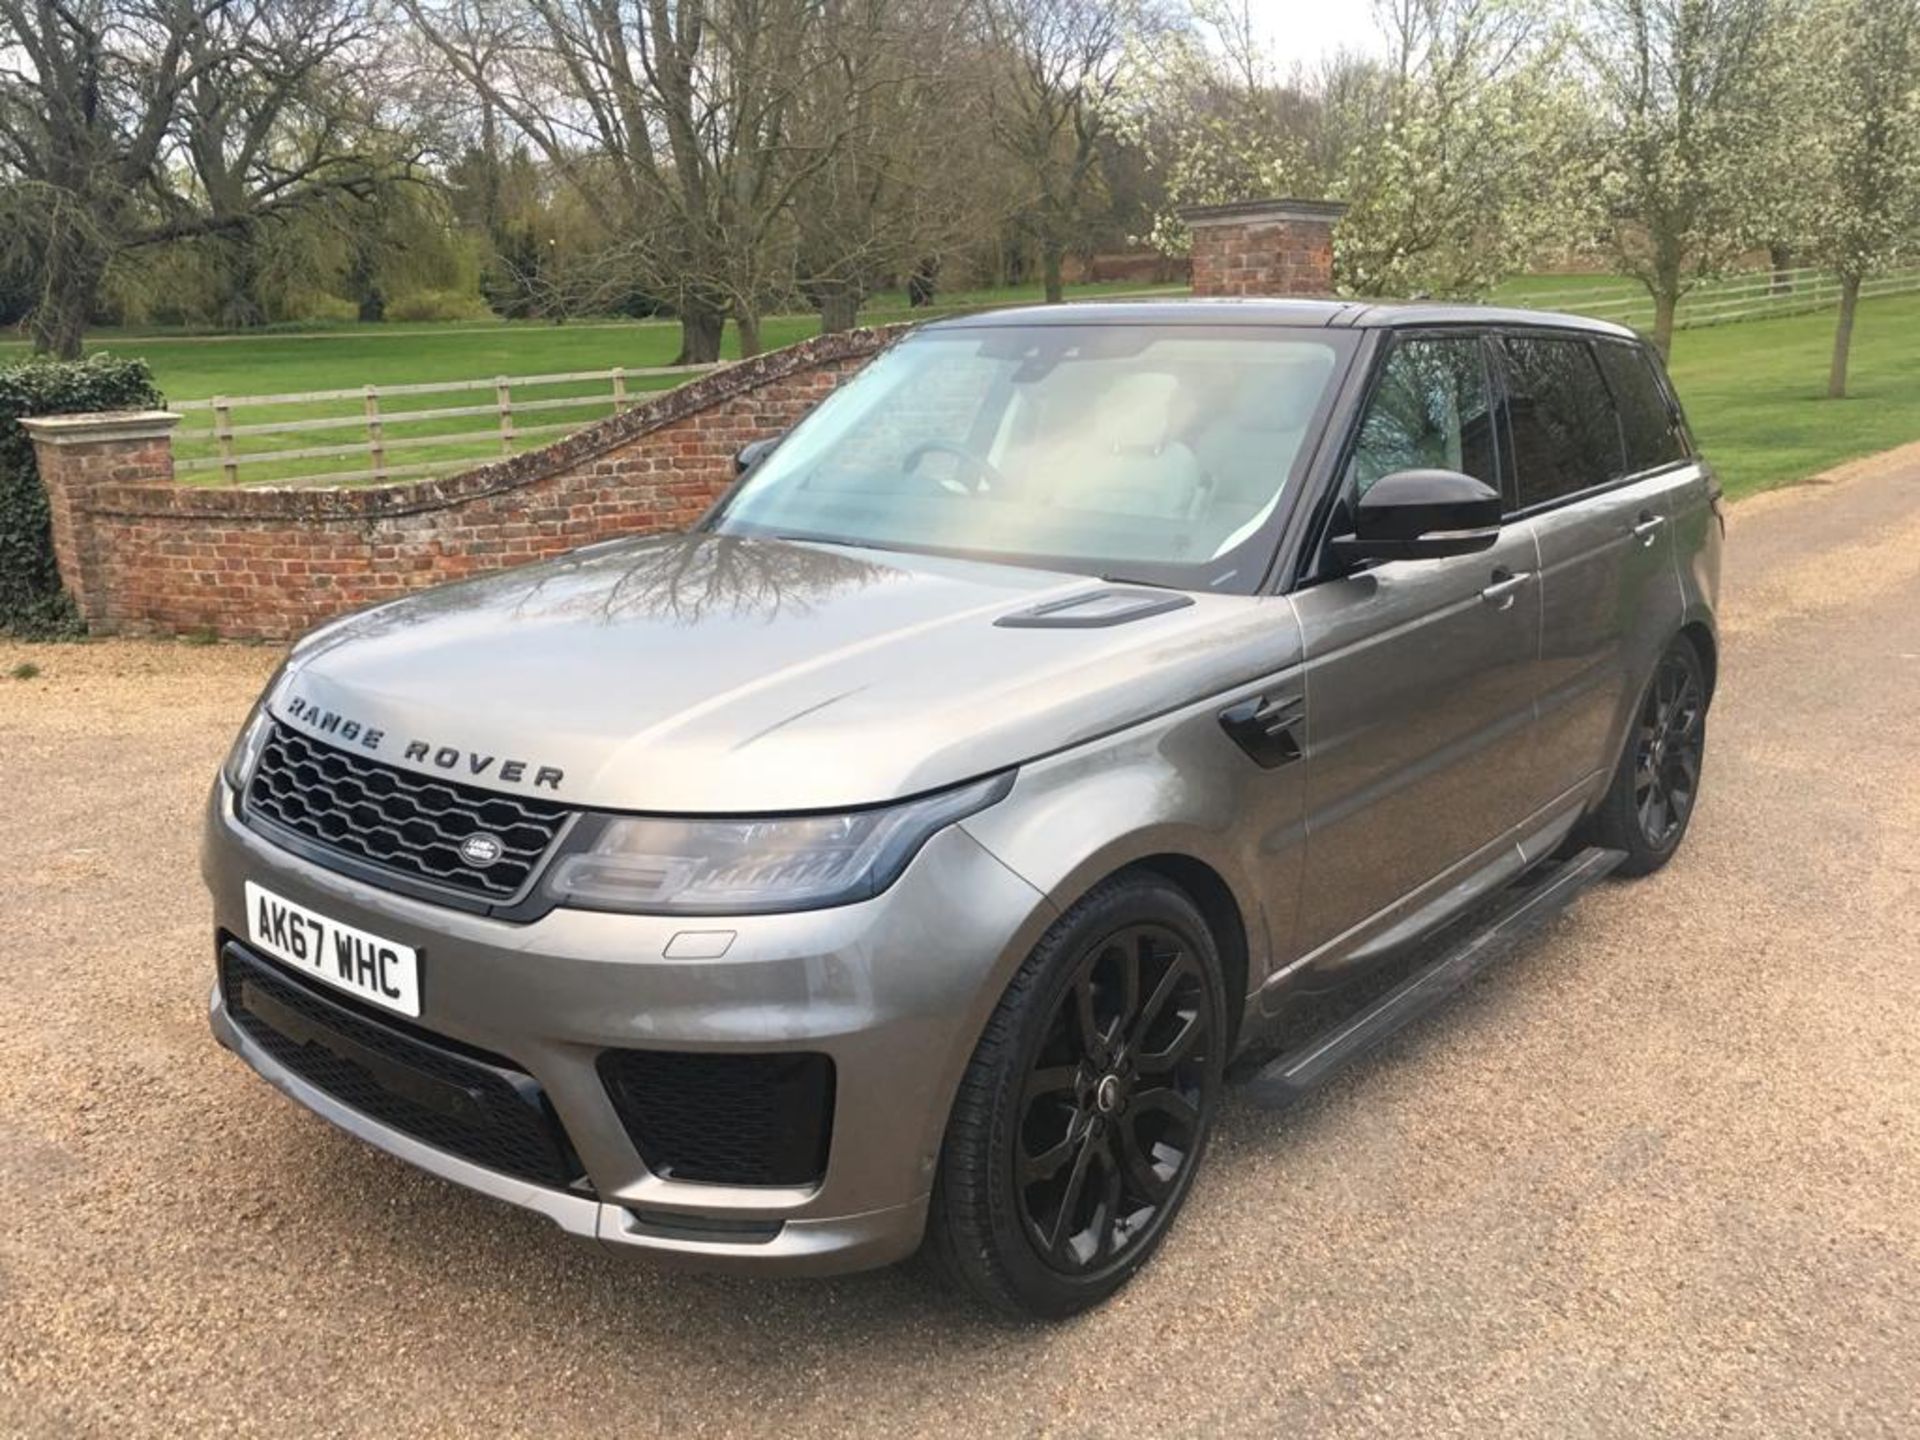 2018 RANGE ROVER SPORT 3.0 HSE DYNAMIC **ONE OWNER FROM NEW**COST £79,800 NEW LAST YEAR** - Image 4 of 26